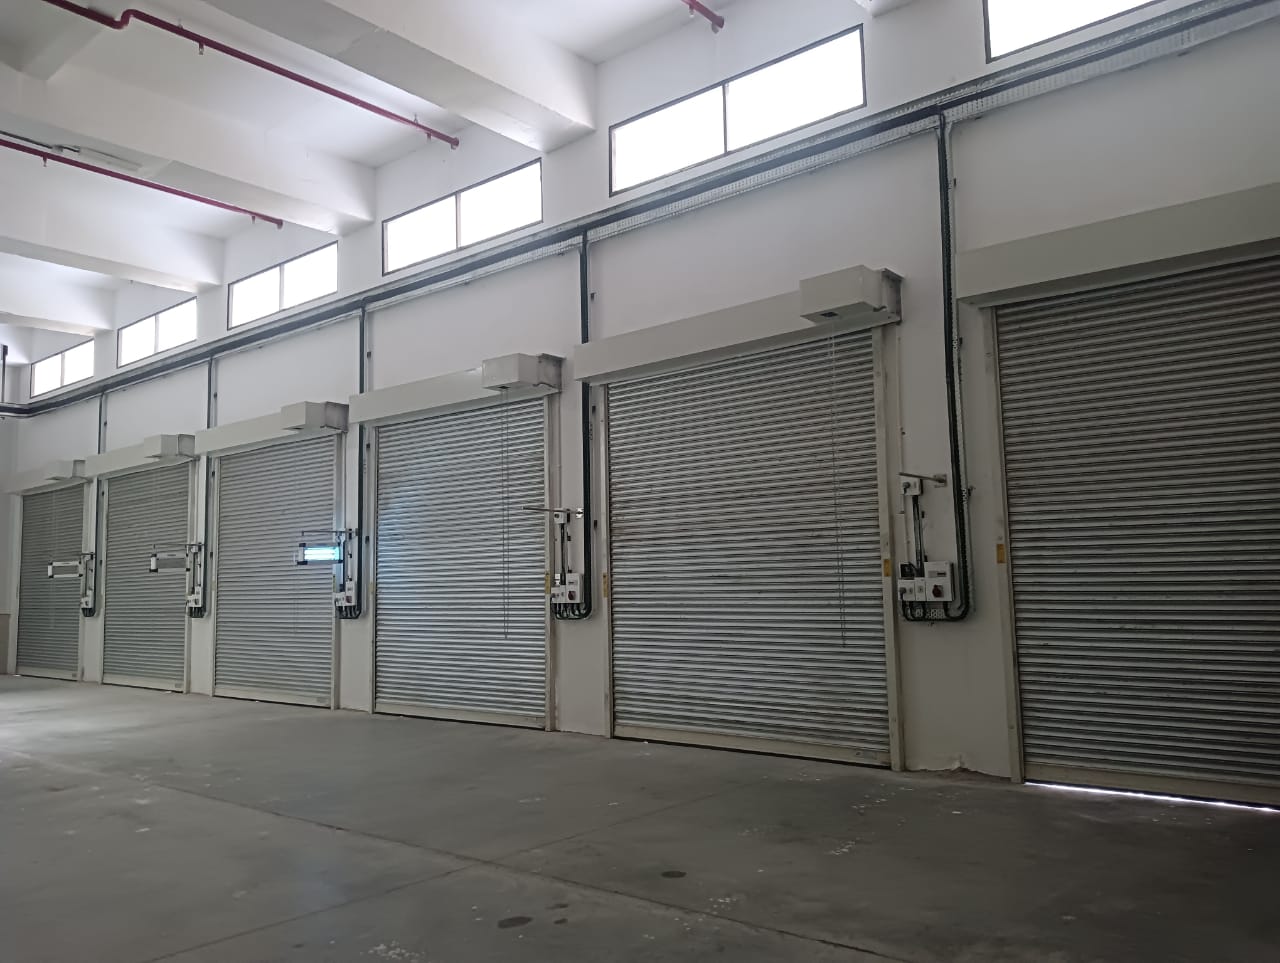 Rolling Shutters for Your Security Needs